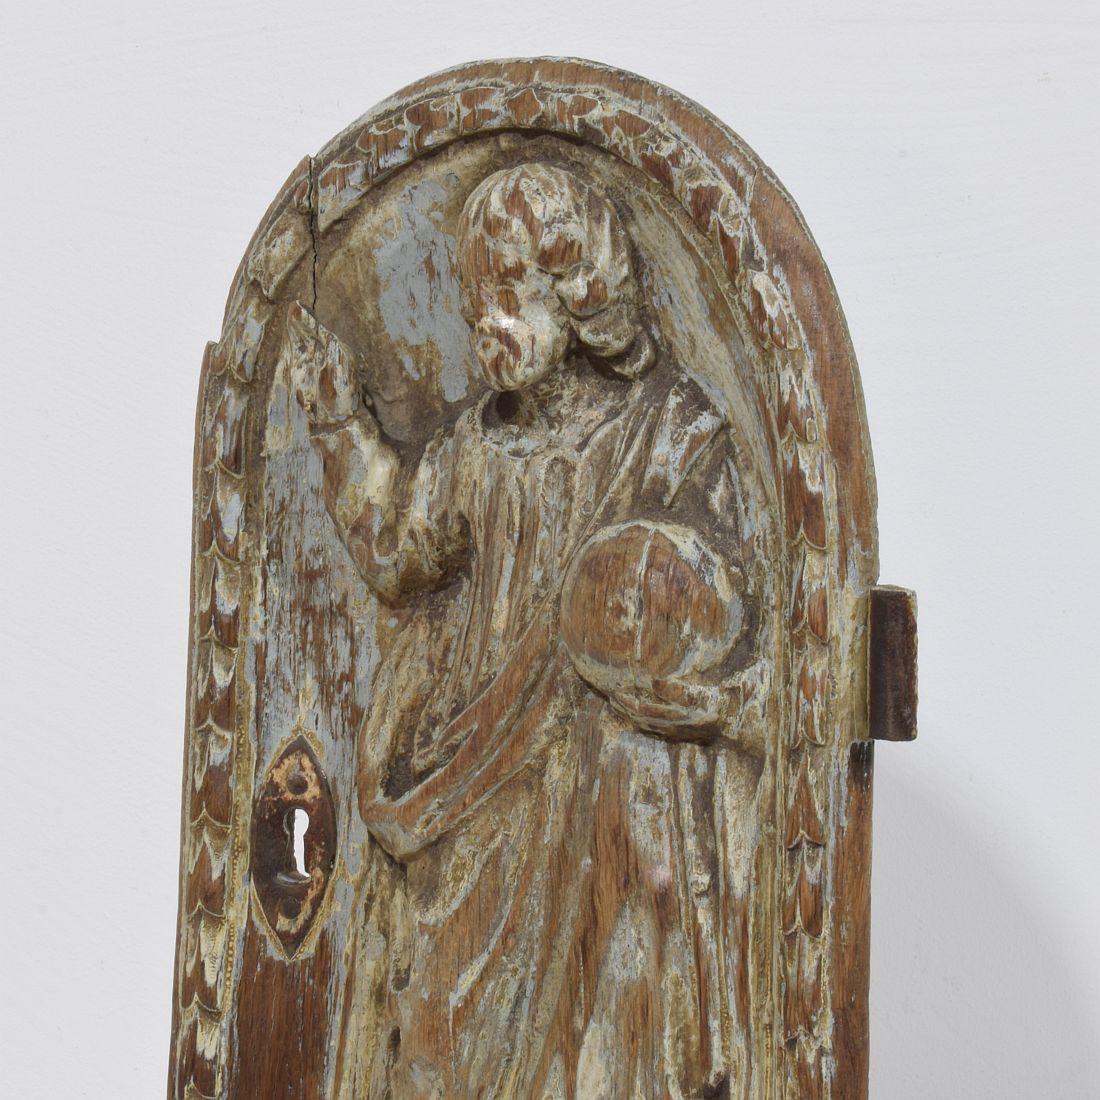 French 18th Century Wooden Tabernacle Door Depicting Christ / Salvator Mundi For Sale 1